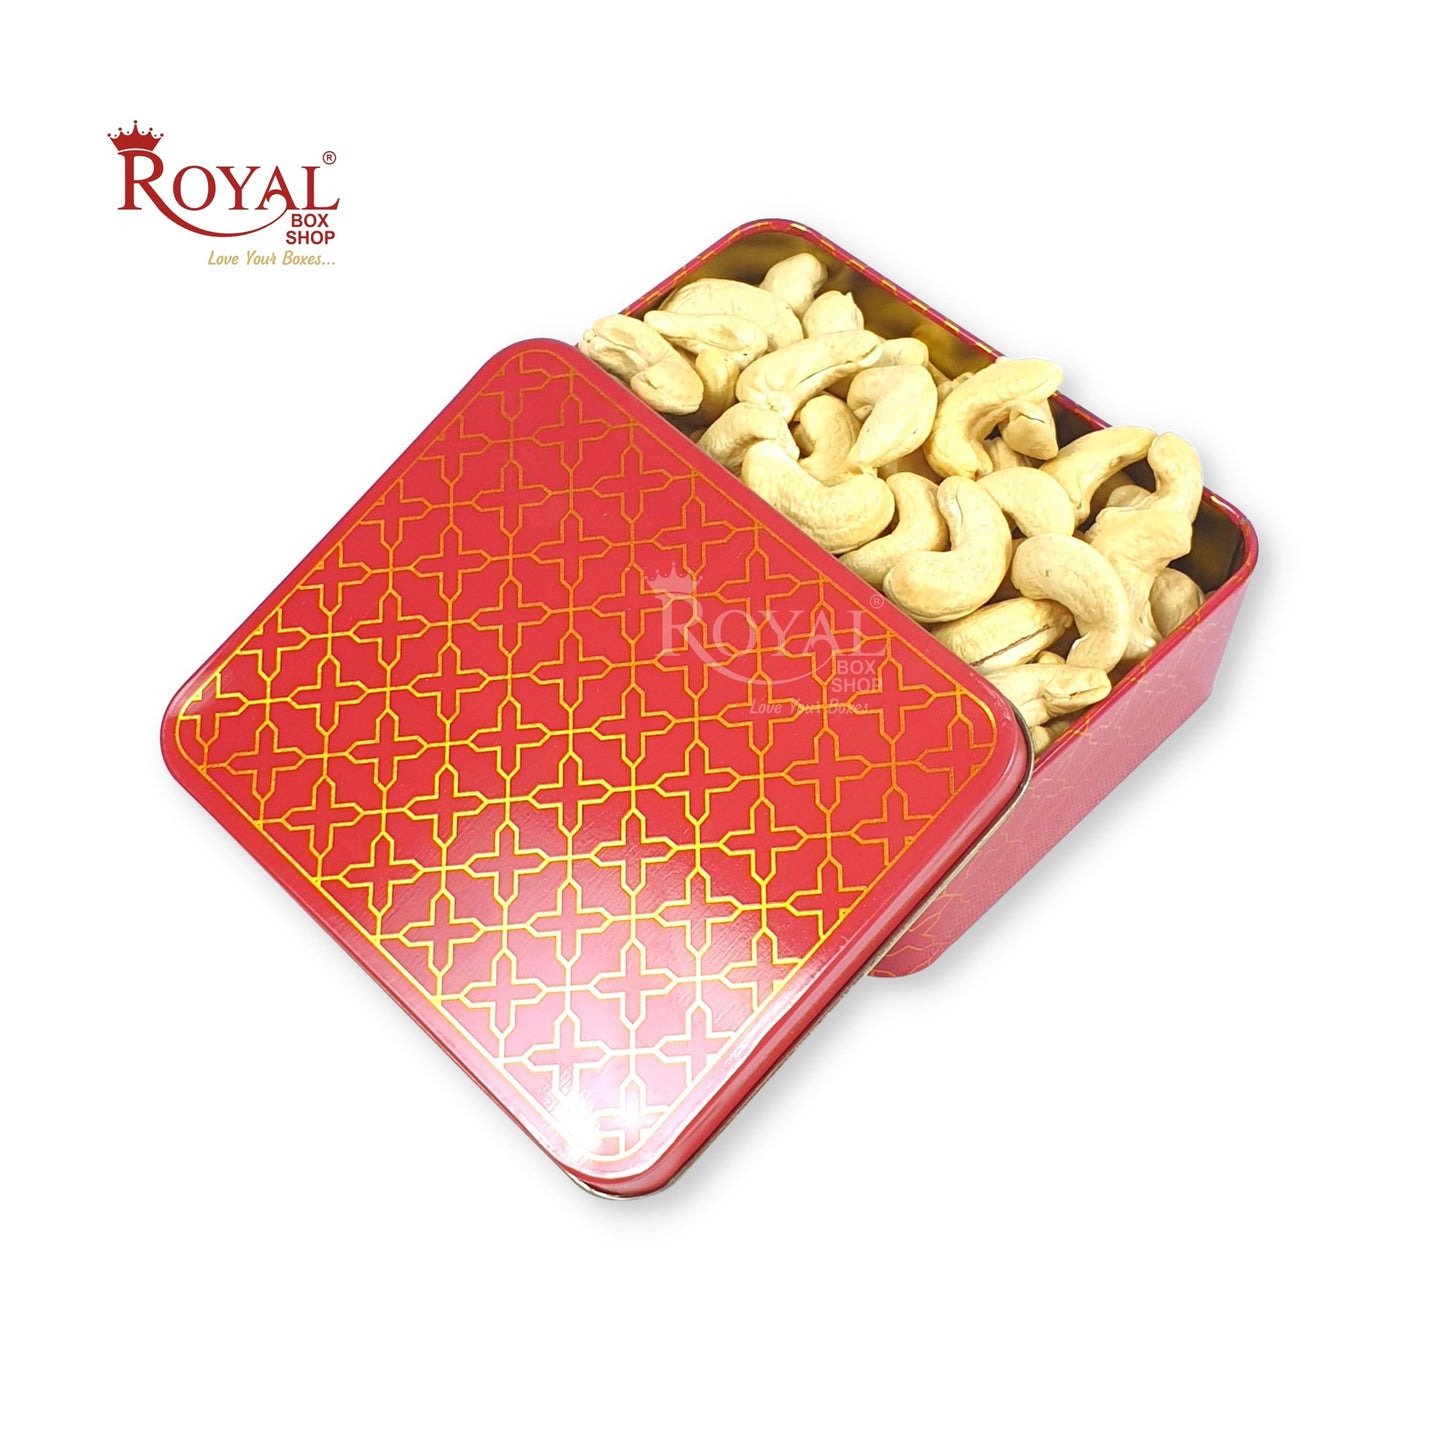 Premium Tin Box I Golden Foiling I 4"x4.75"x1.5" Inches I Red Color I For Return Gifts, Hamper Box, Dry Fruits Packing